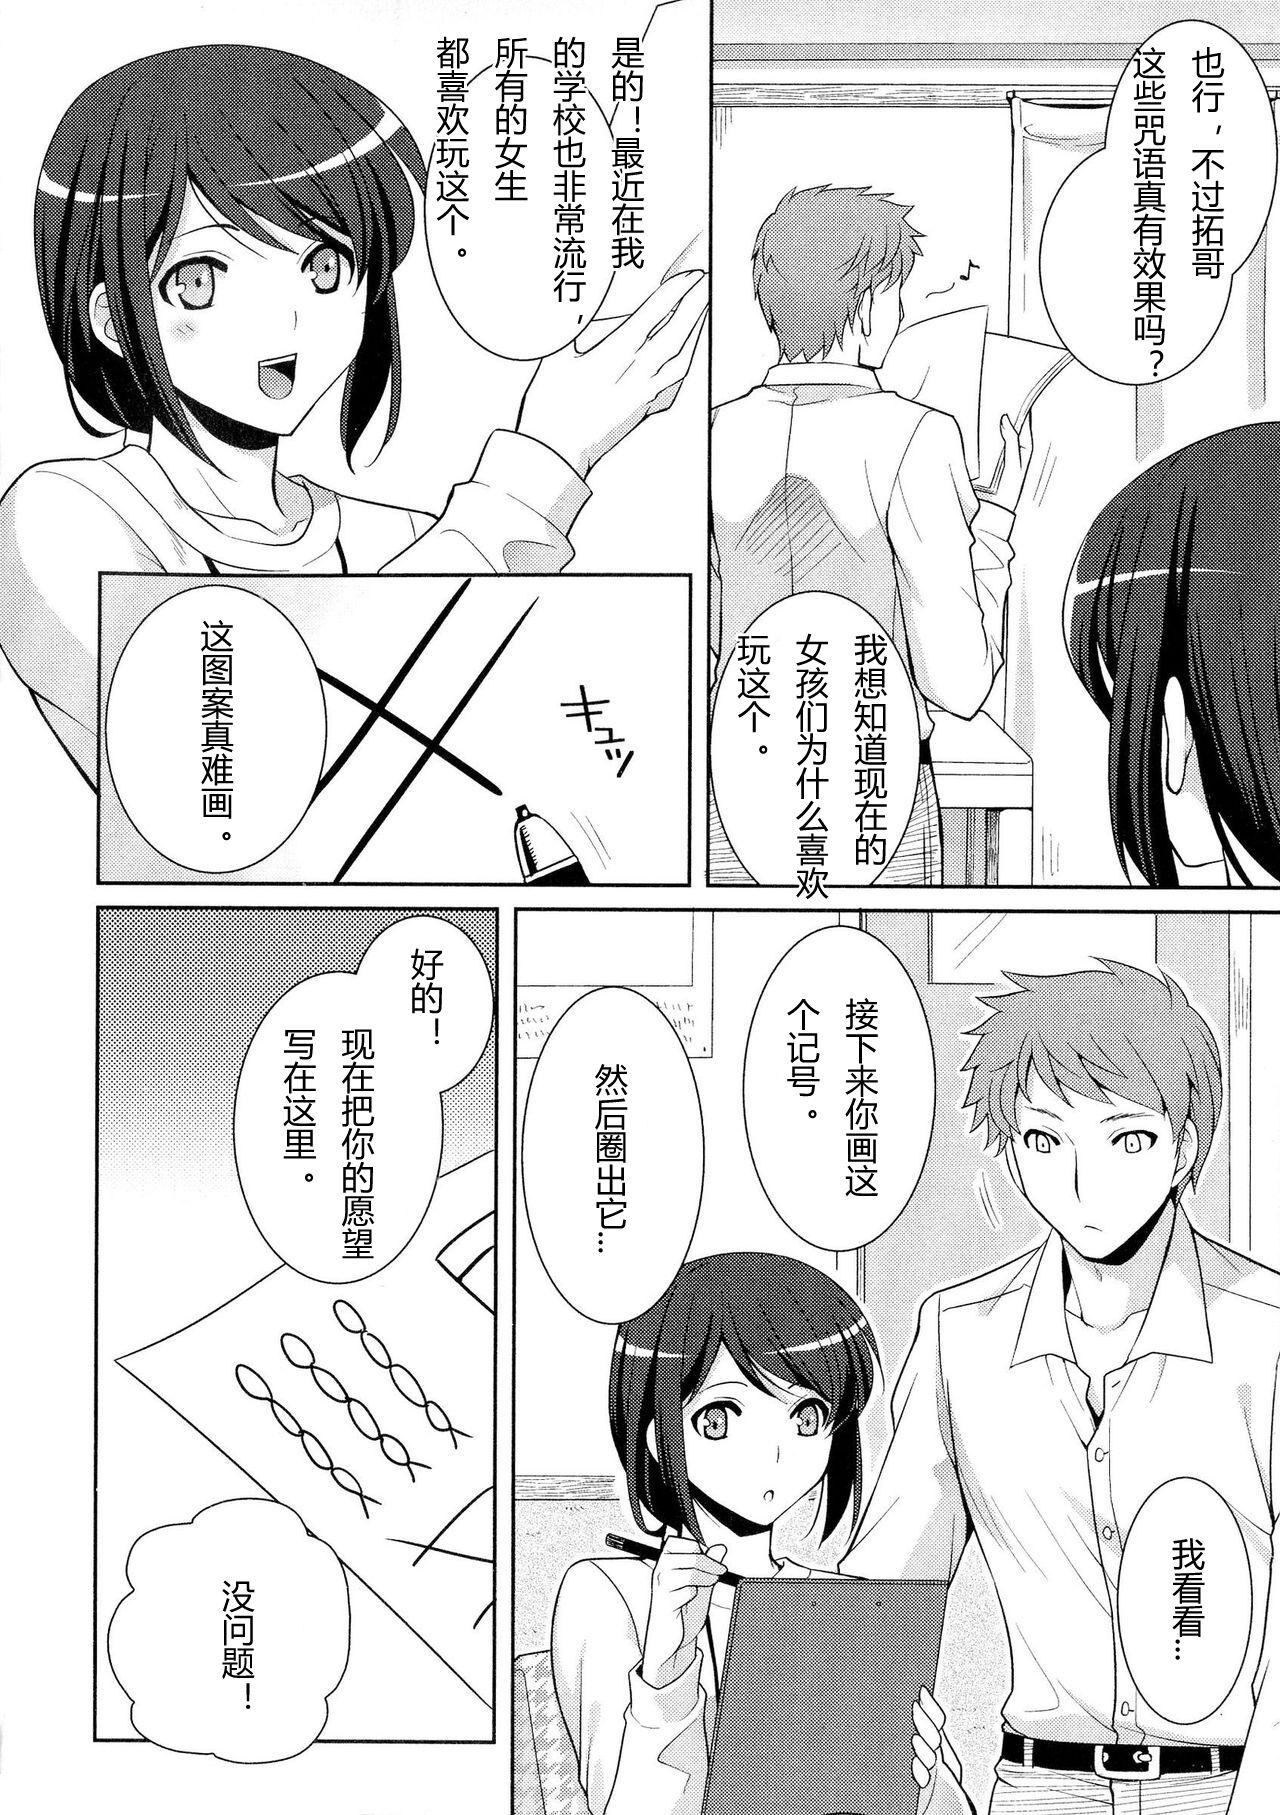 Rough Porn Omajinai wa Hodohodo ni! | Don't go too crazy with magic spells! Jerking Off - Page 2